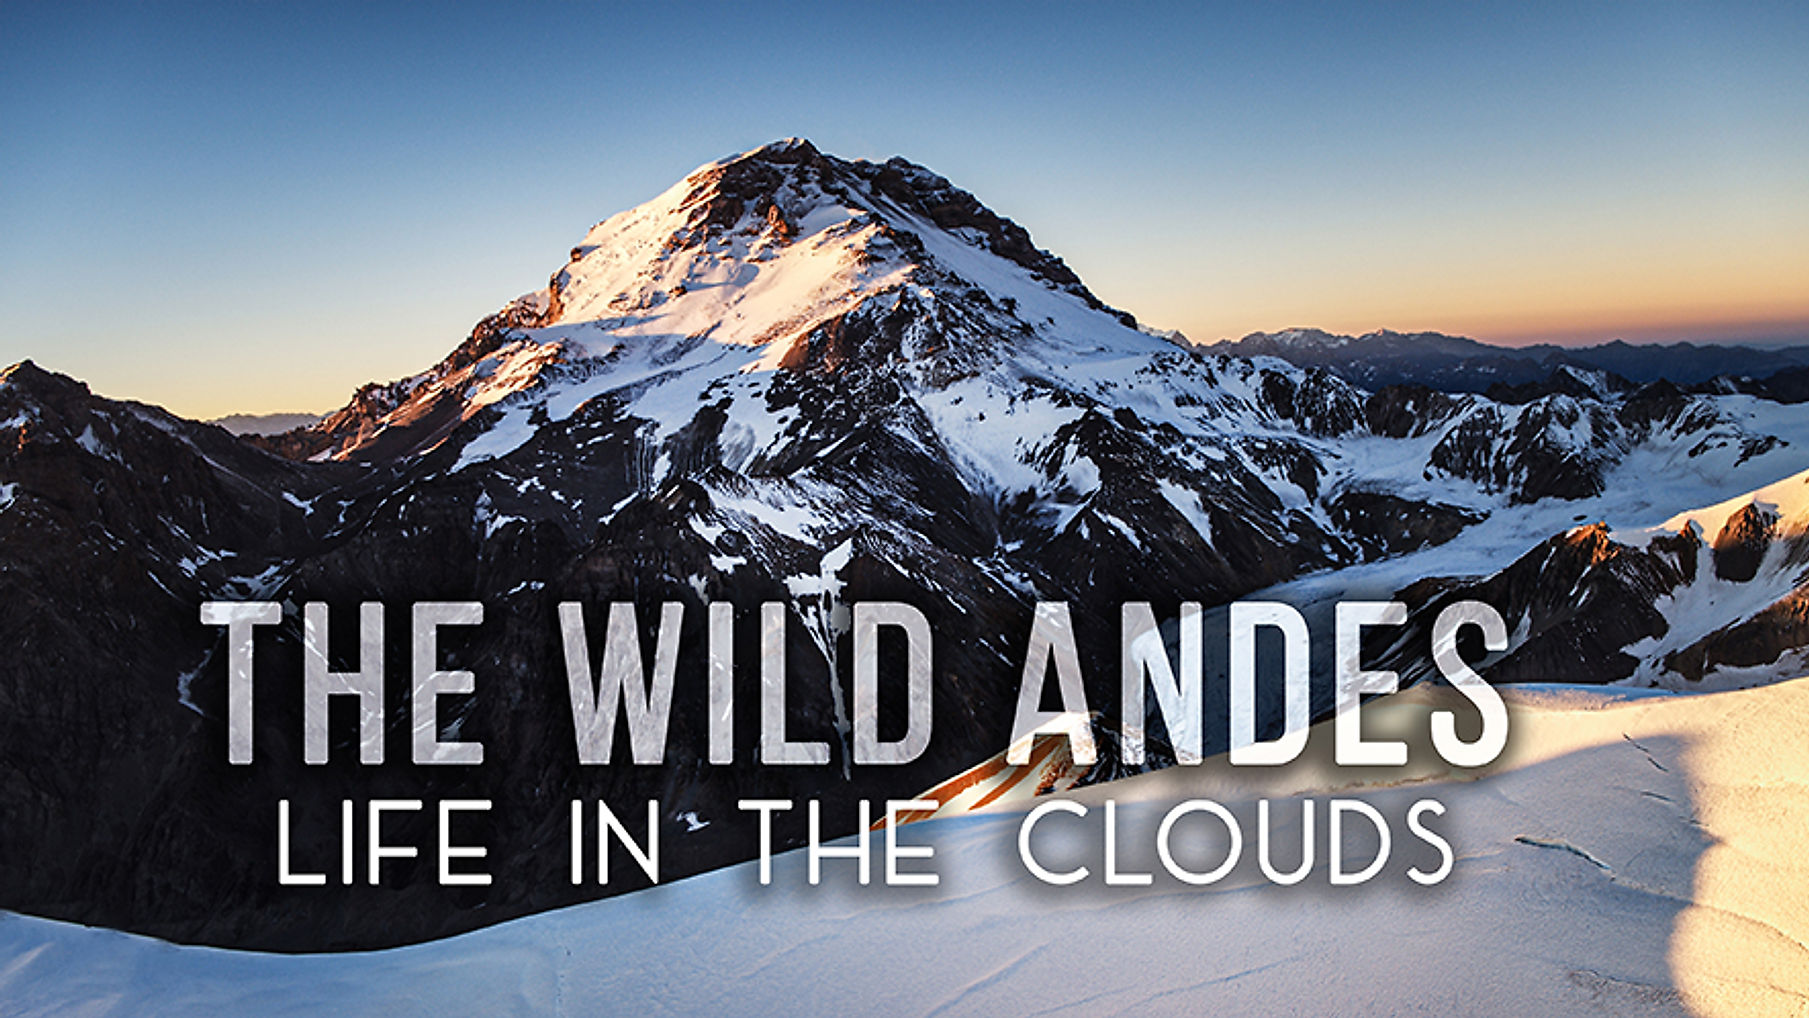 The Wild Andes - Life in the Clouds